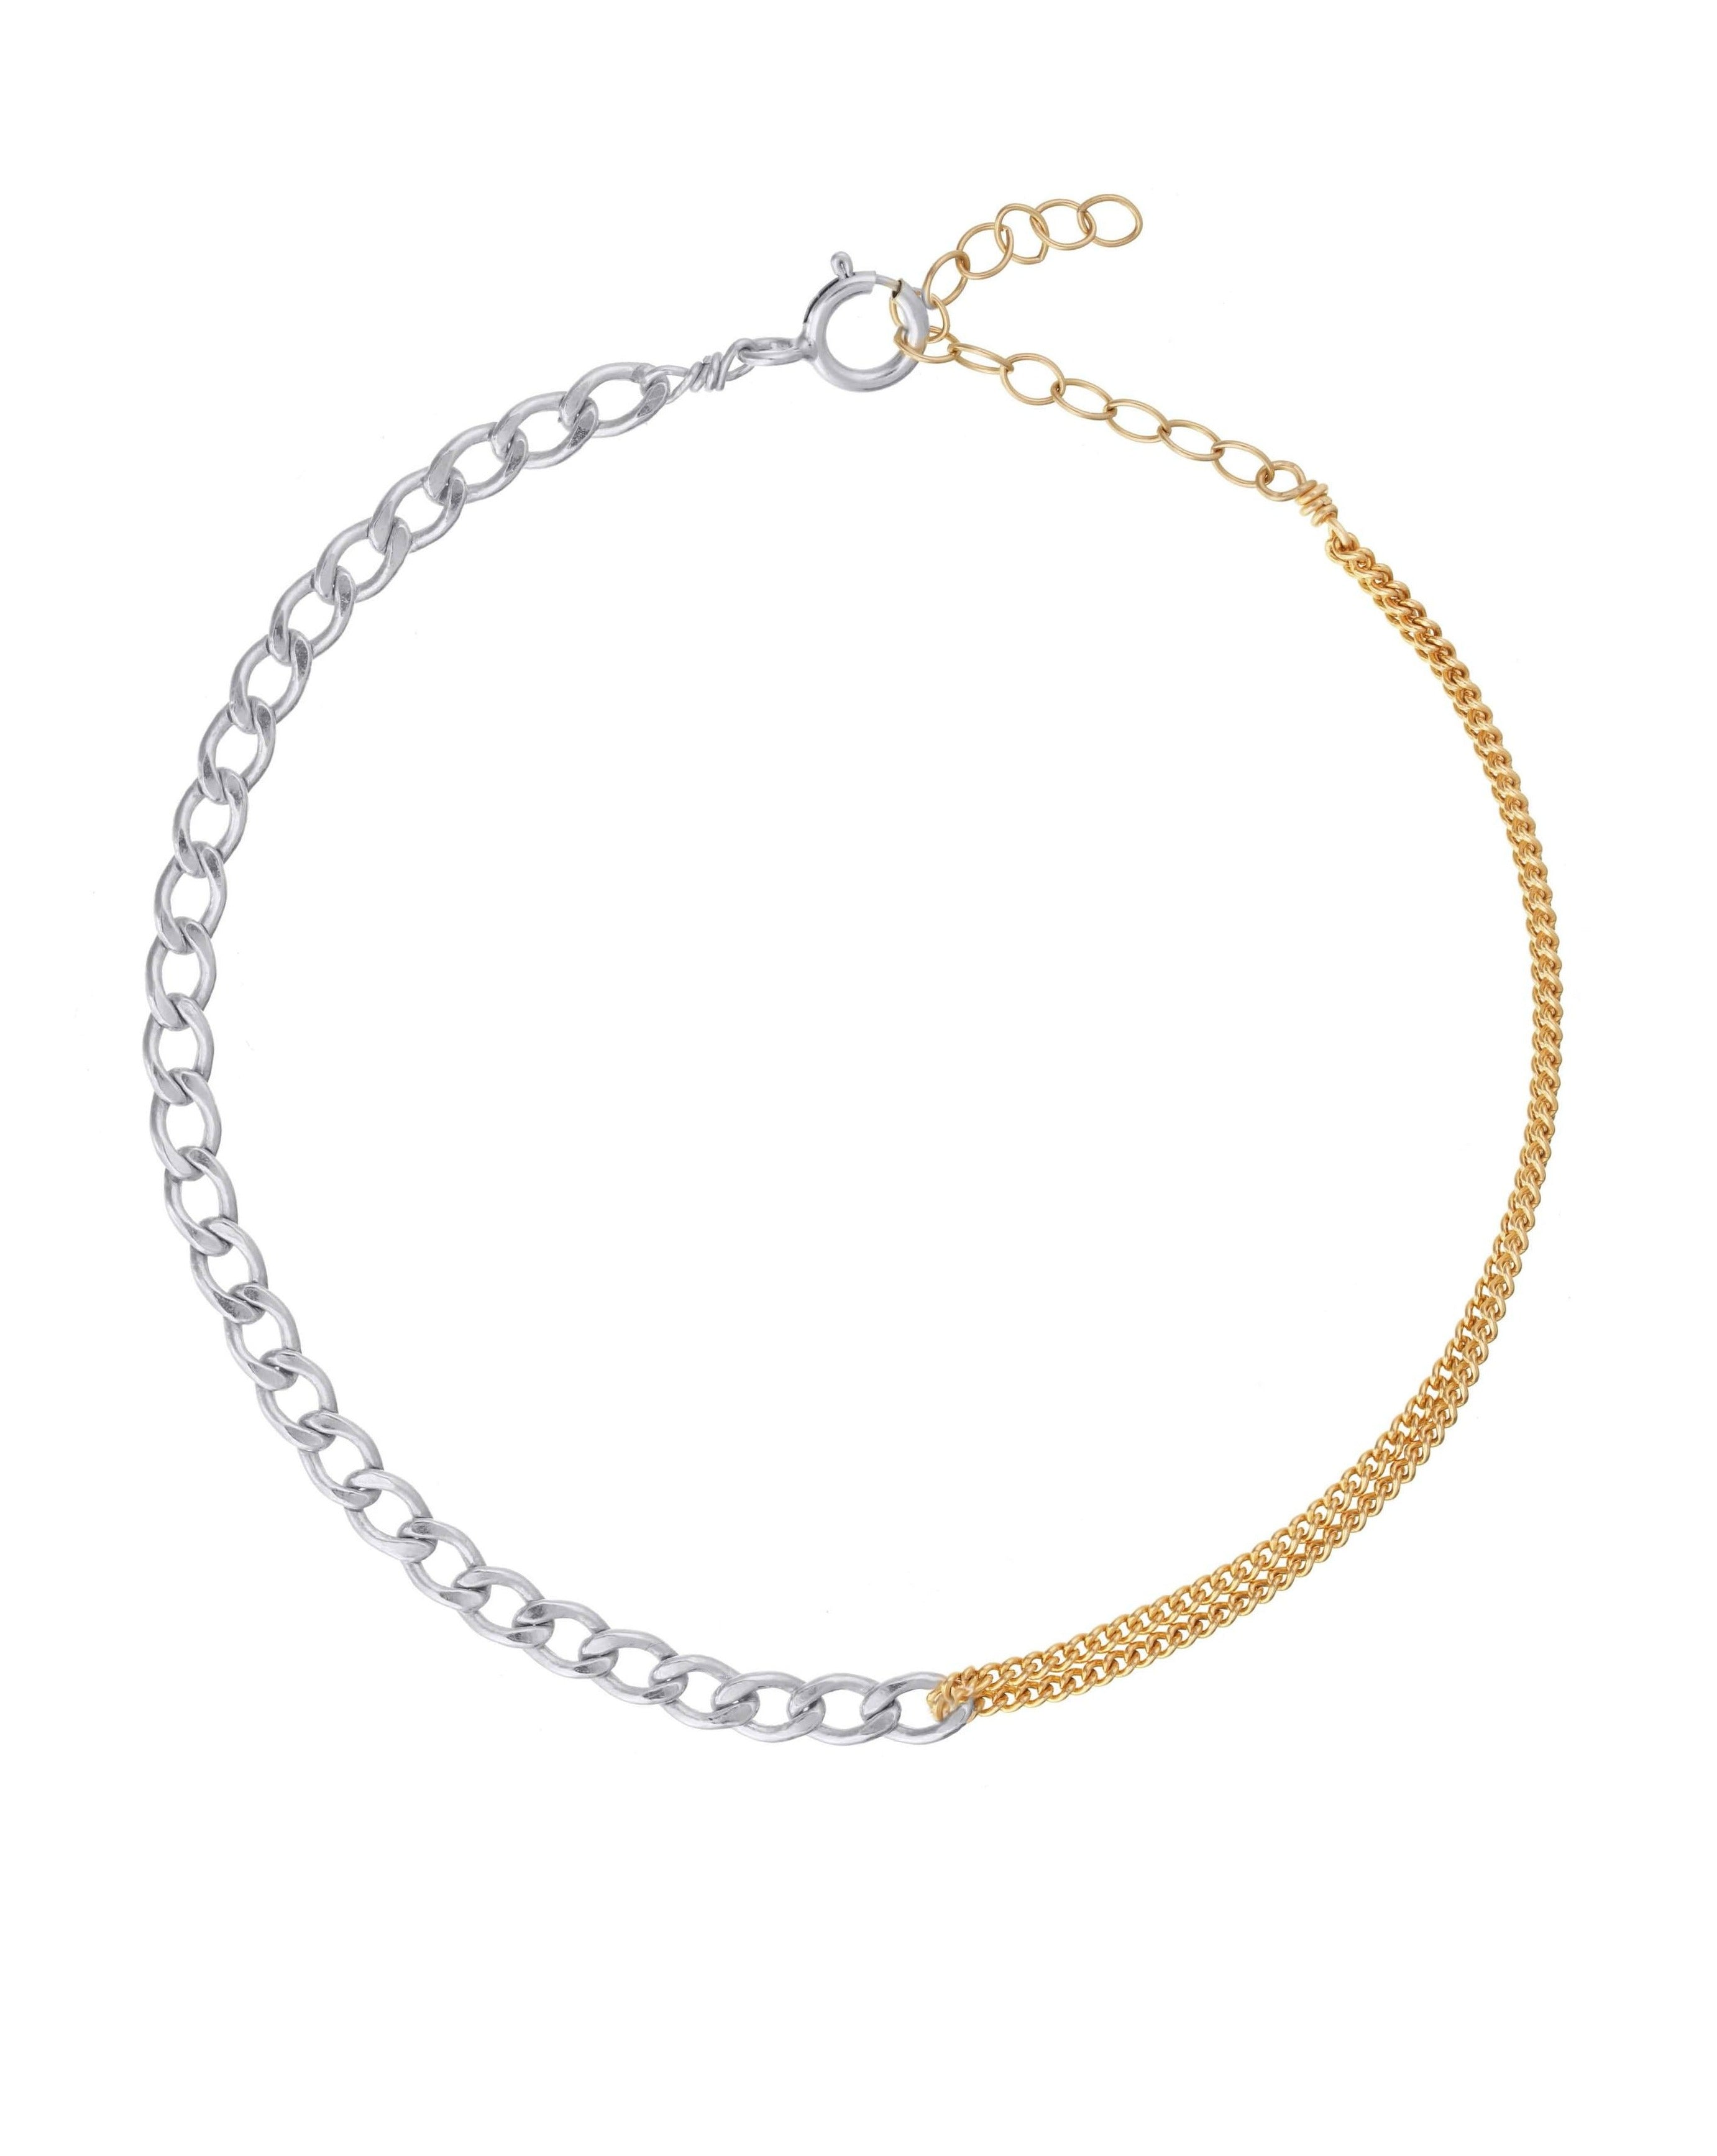 Moni Anklet by KOZAKH. A 9 to 11 inch adjustable length combo anklet with Gold Filled flat link chain on one half and Sterling Silver Cuban link chain on the other half.